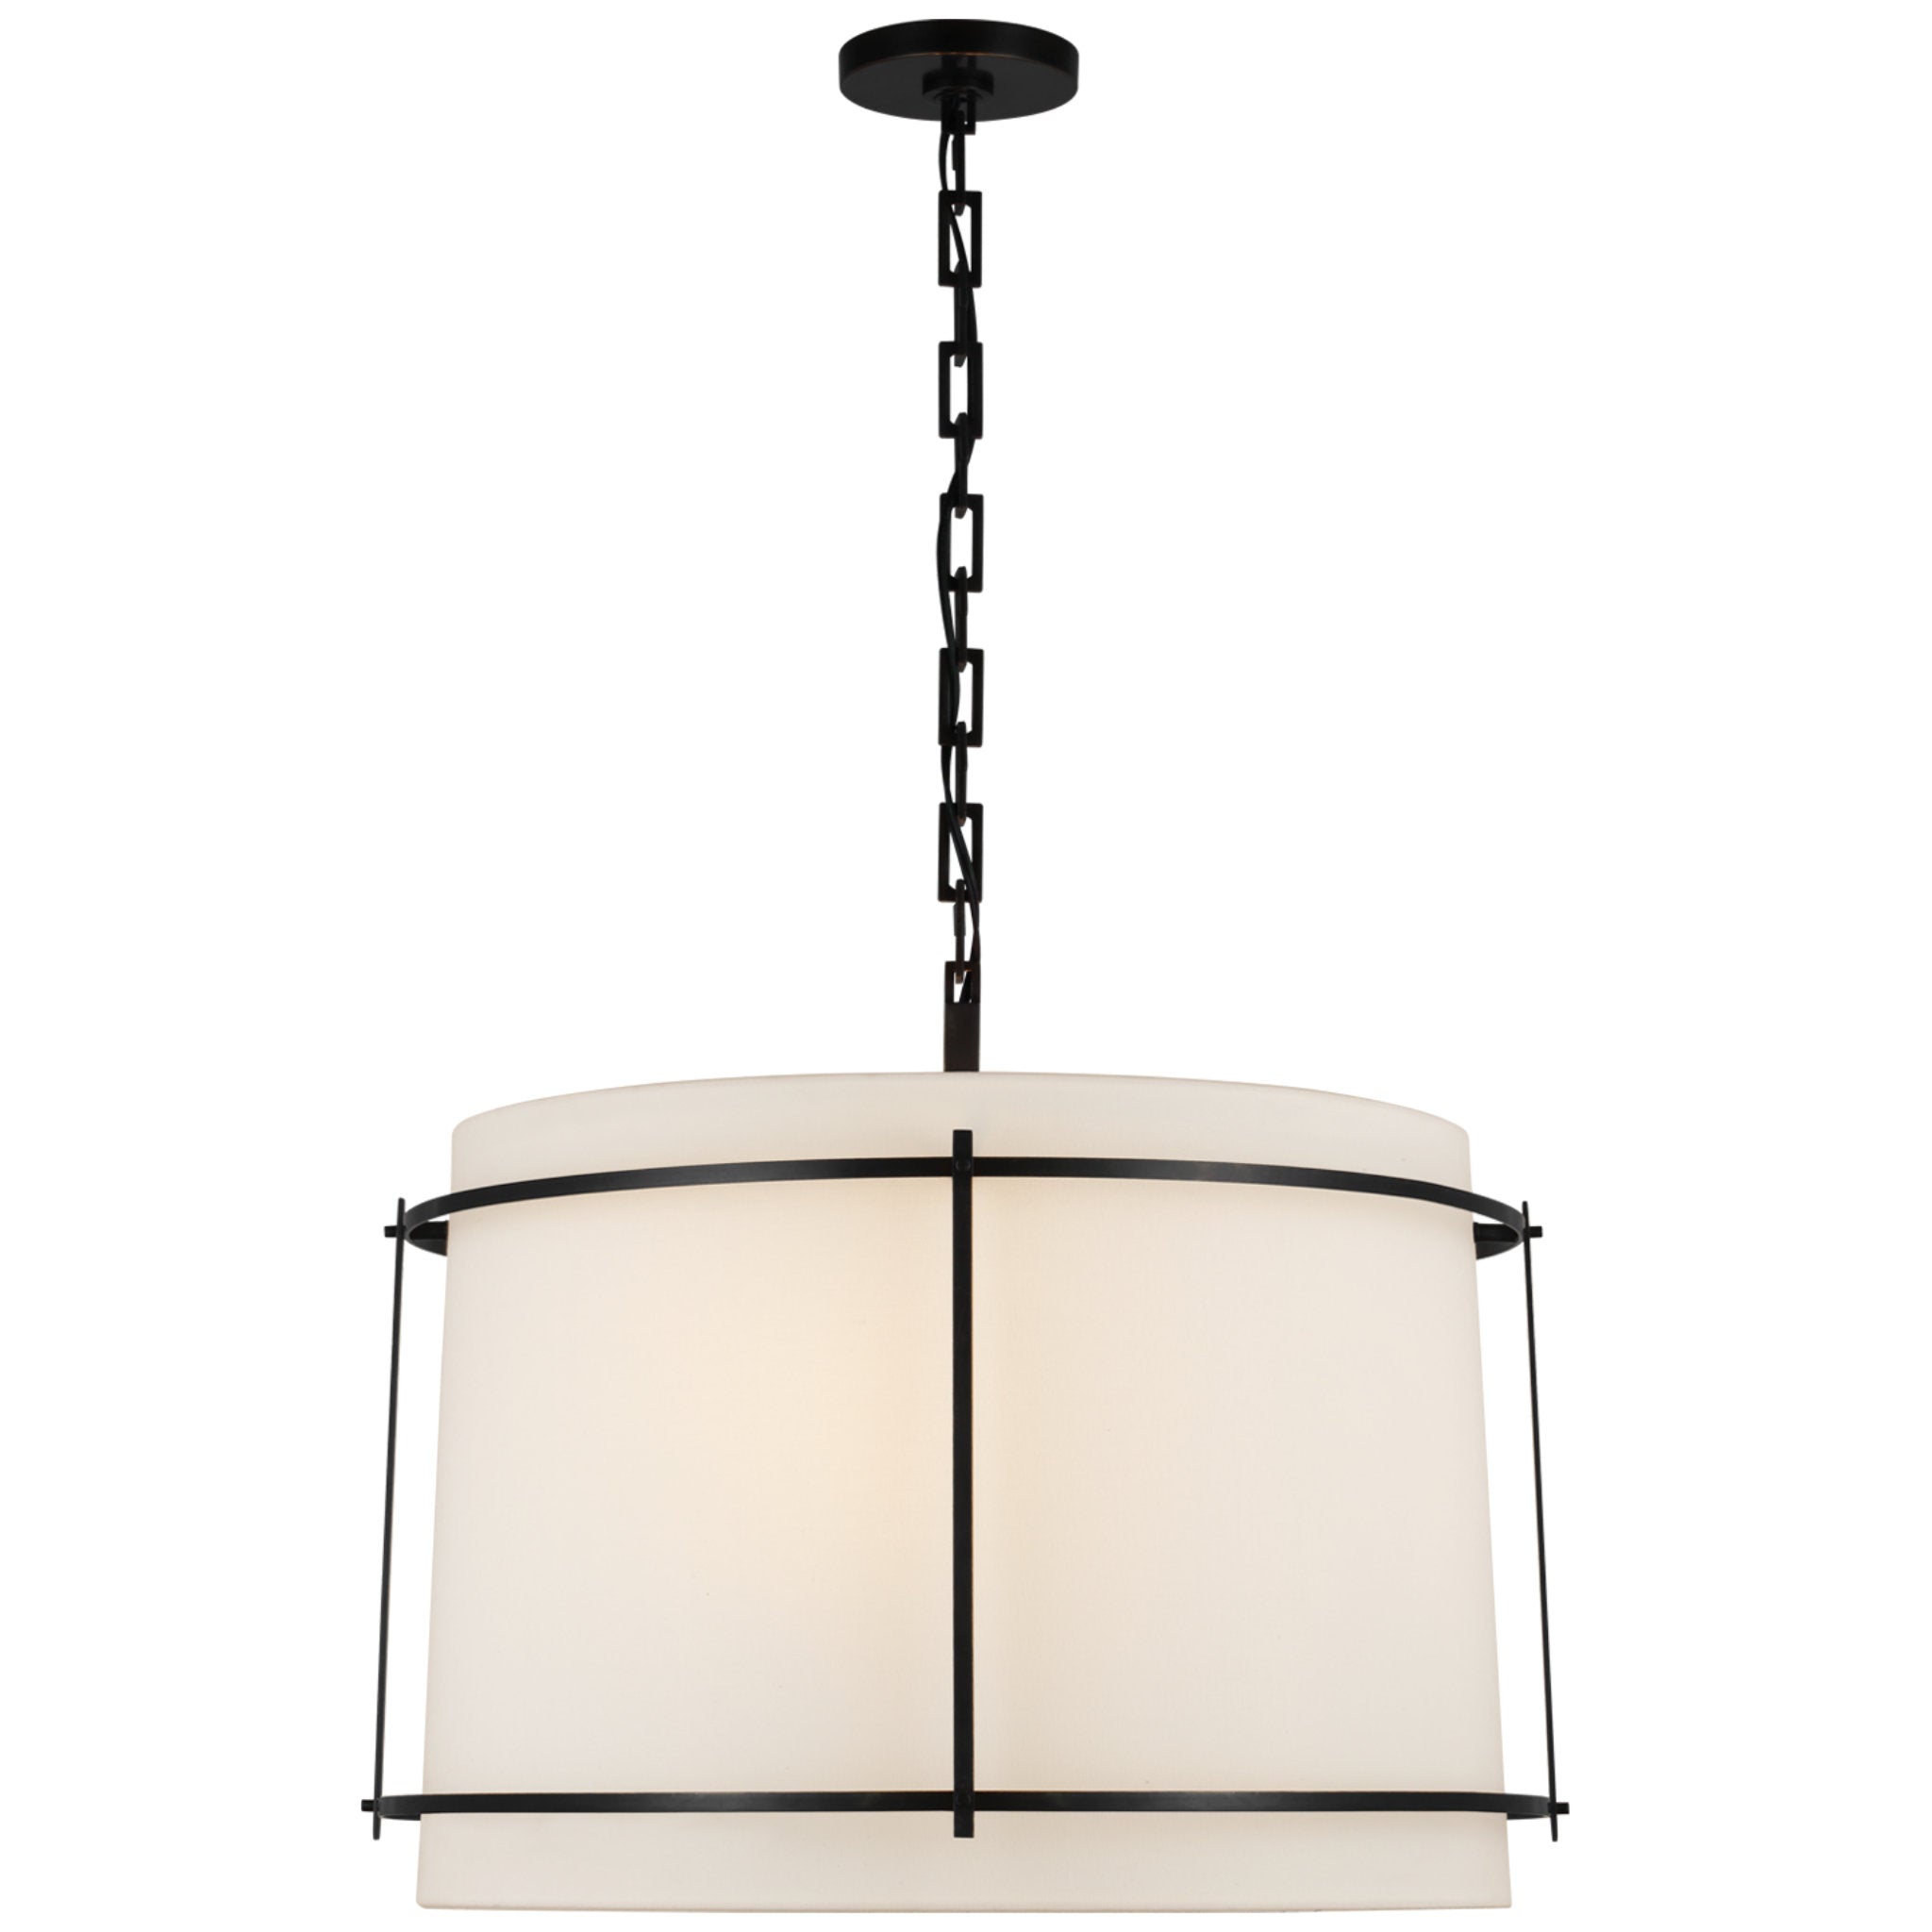 Carrier and Company Callaway Large Hanging Shade in Bronze with Linen Shade and Frosted Acrylic Diffuser